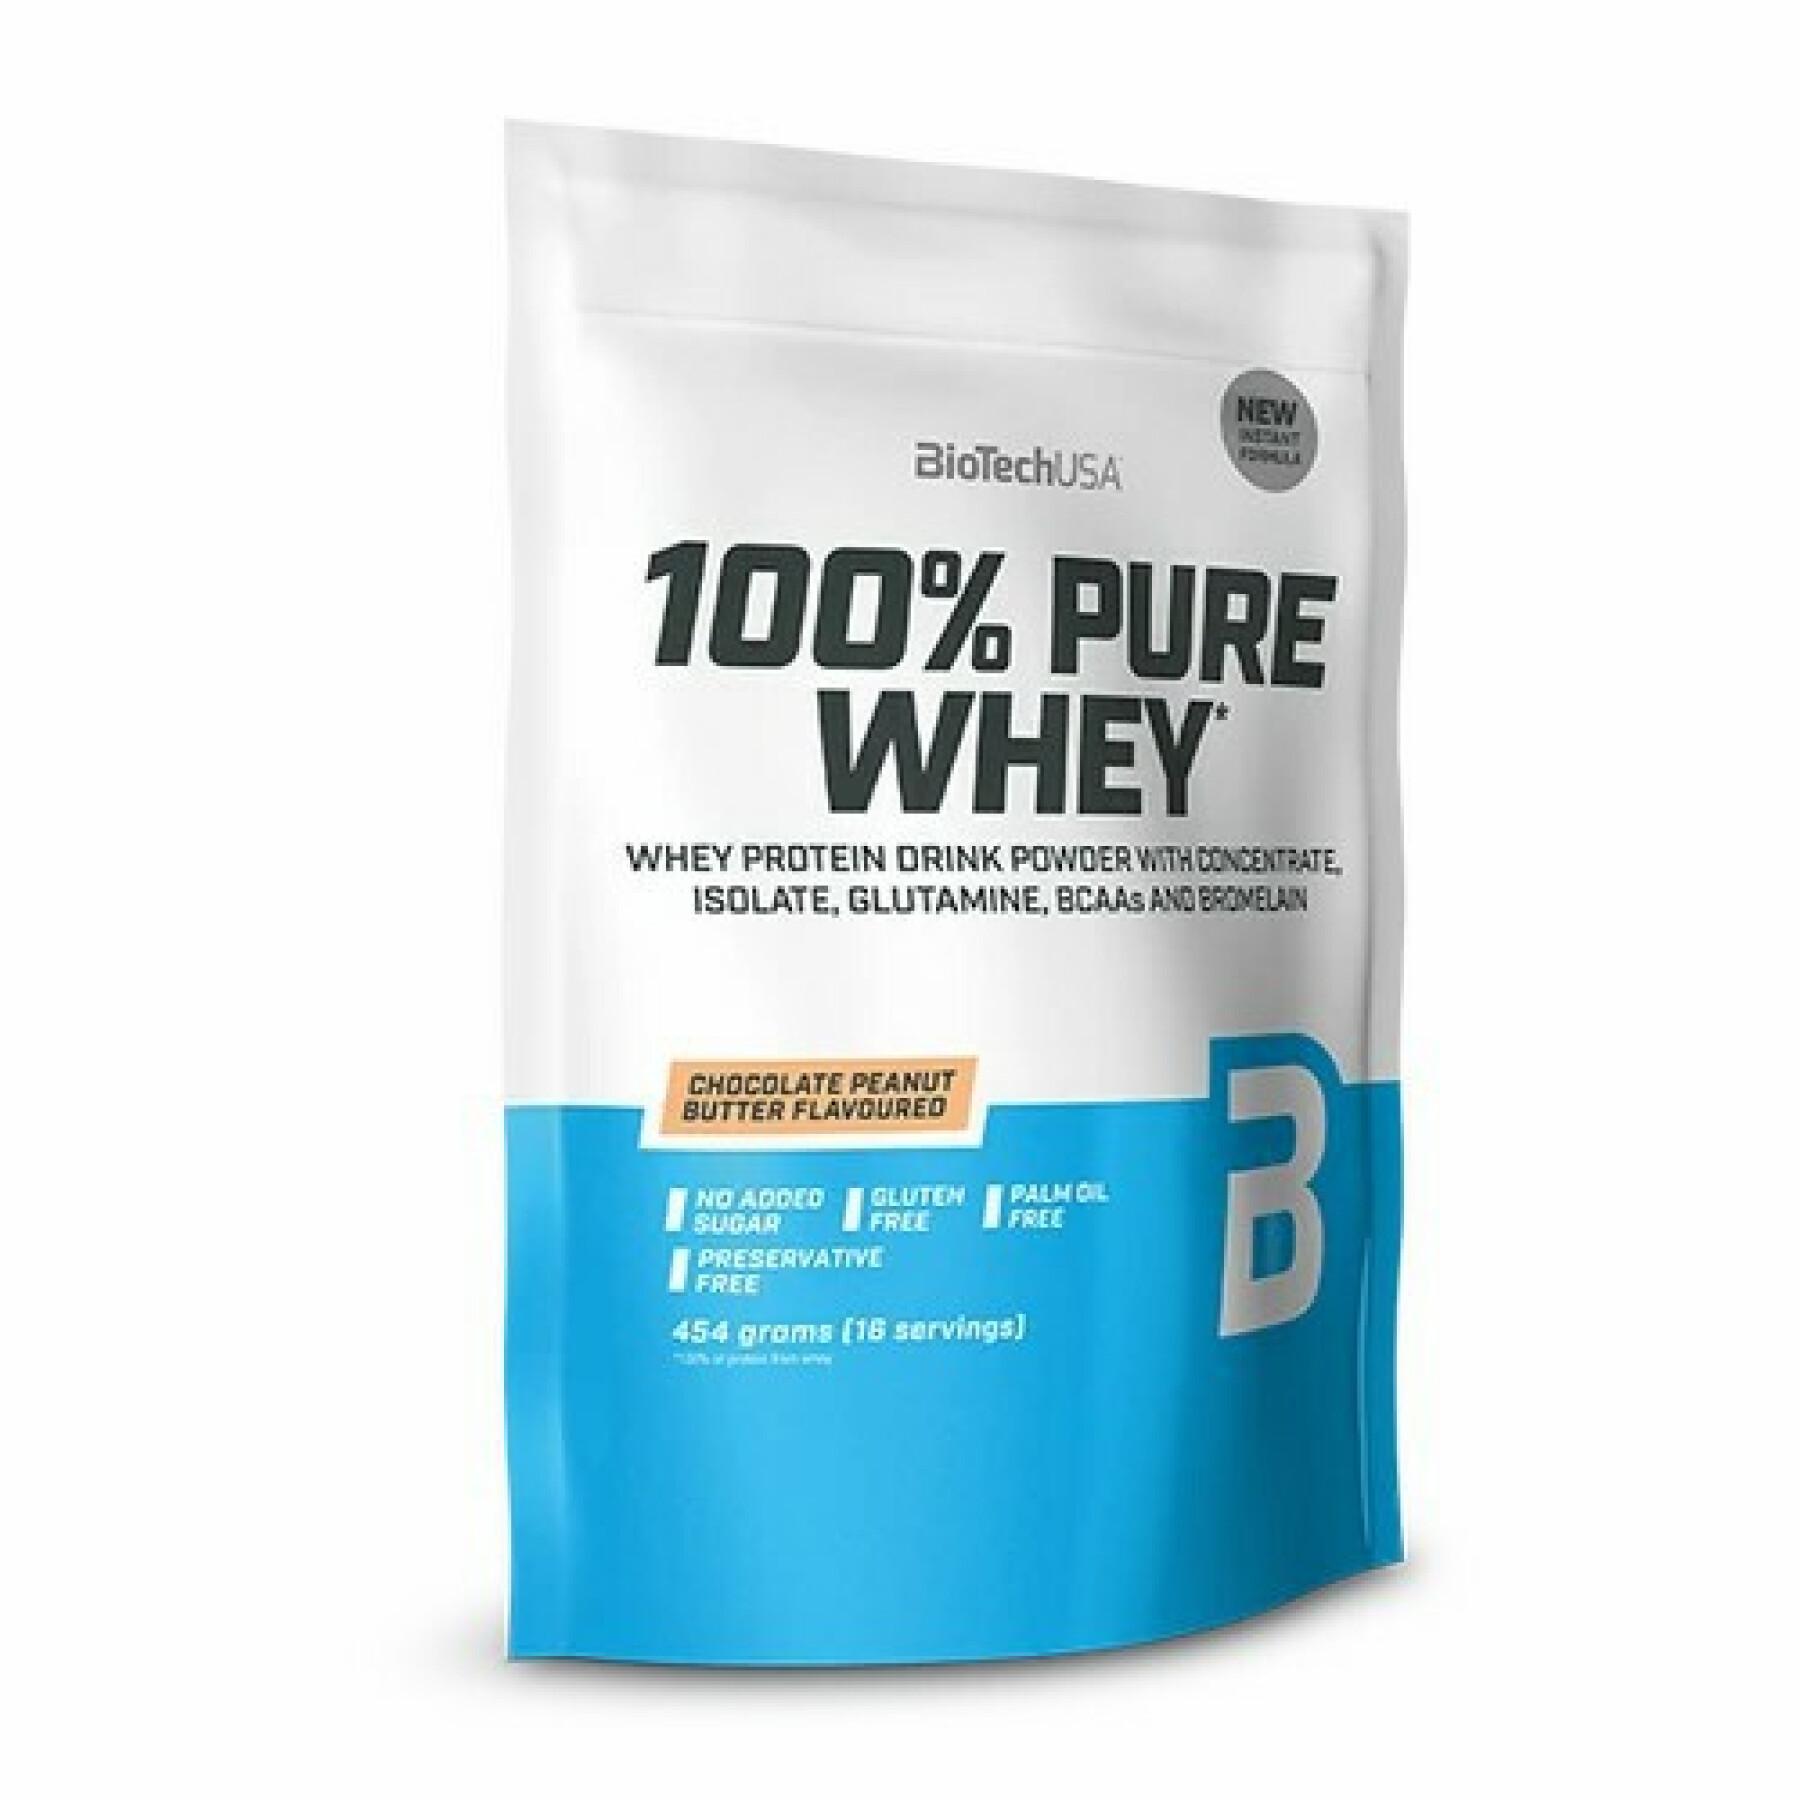 Lot of 10 bags of 100% pure whey protein Biotech USA - Chocolat-beurre de noise - 454g